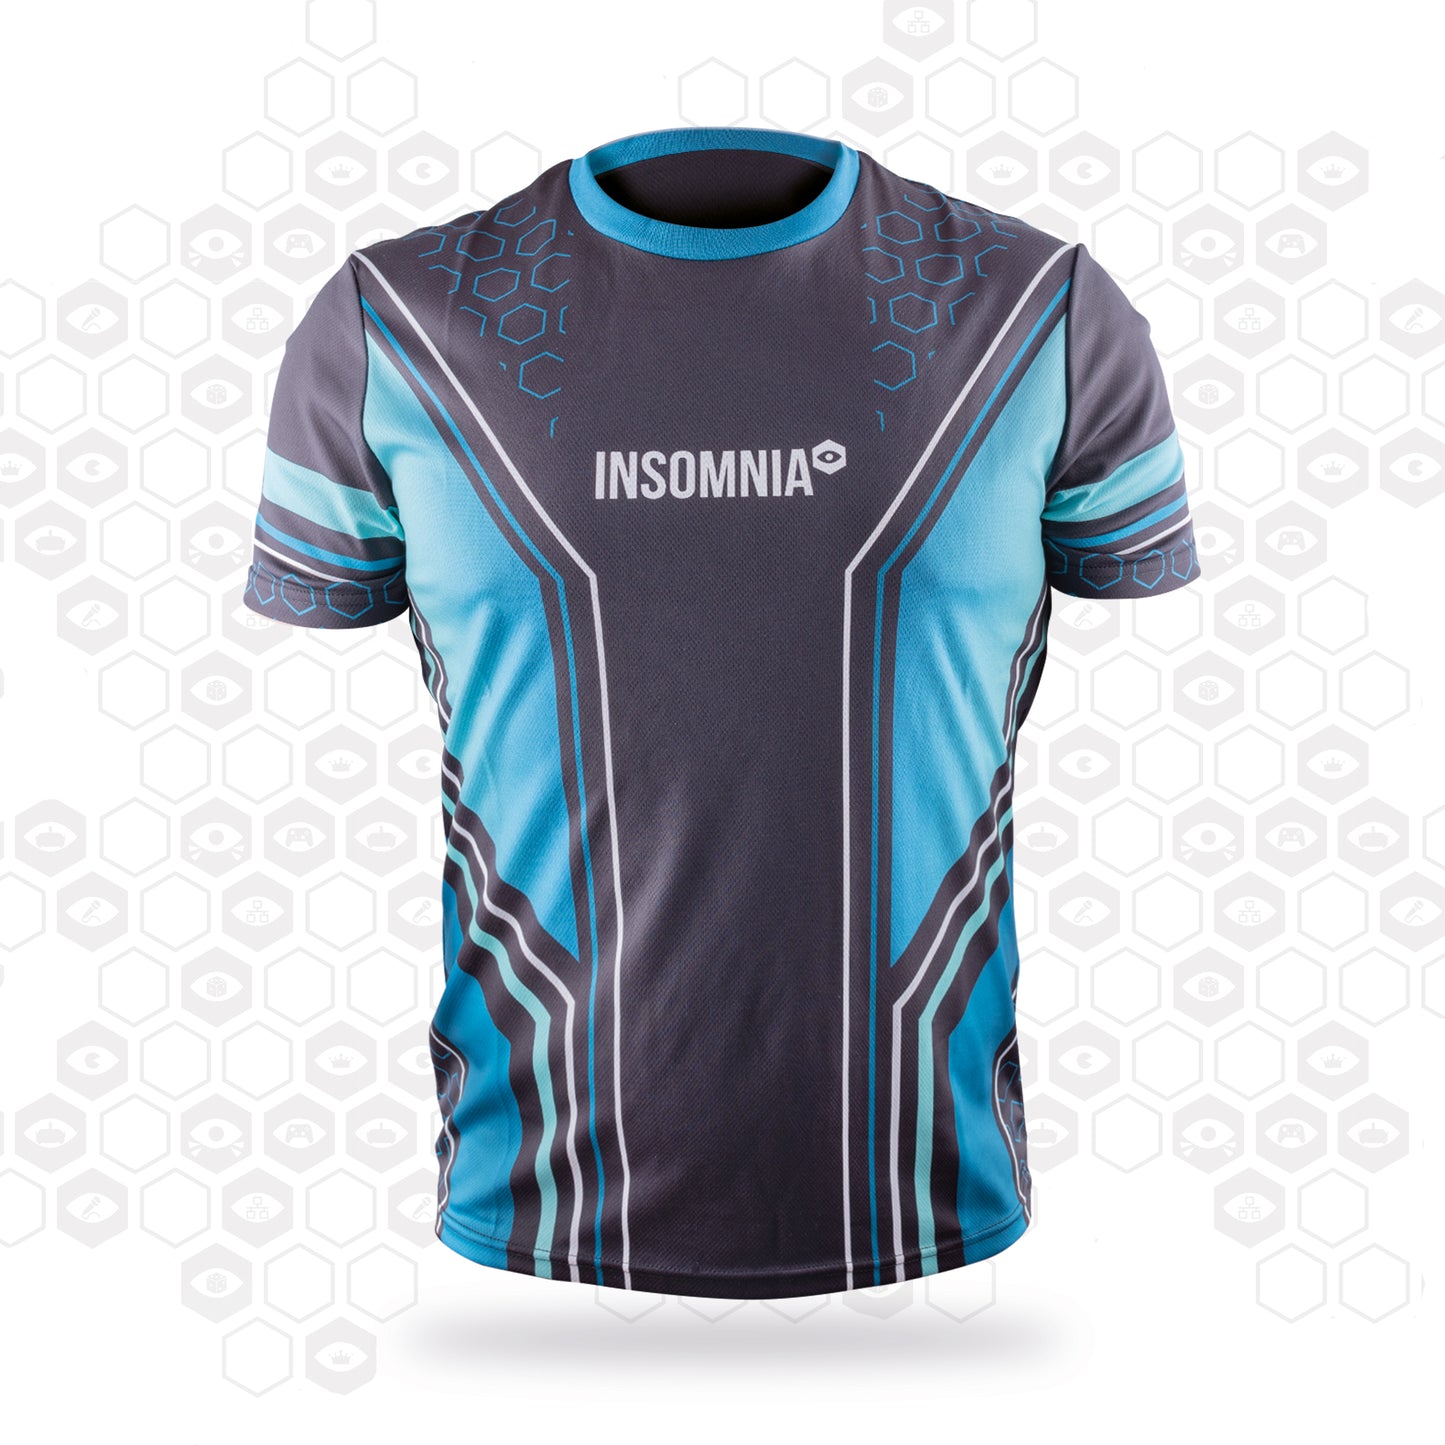 Performance t-shirt with insomnia logo on the chest and blue and white design inspired by the insomnia eye motif